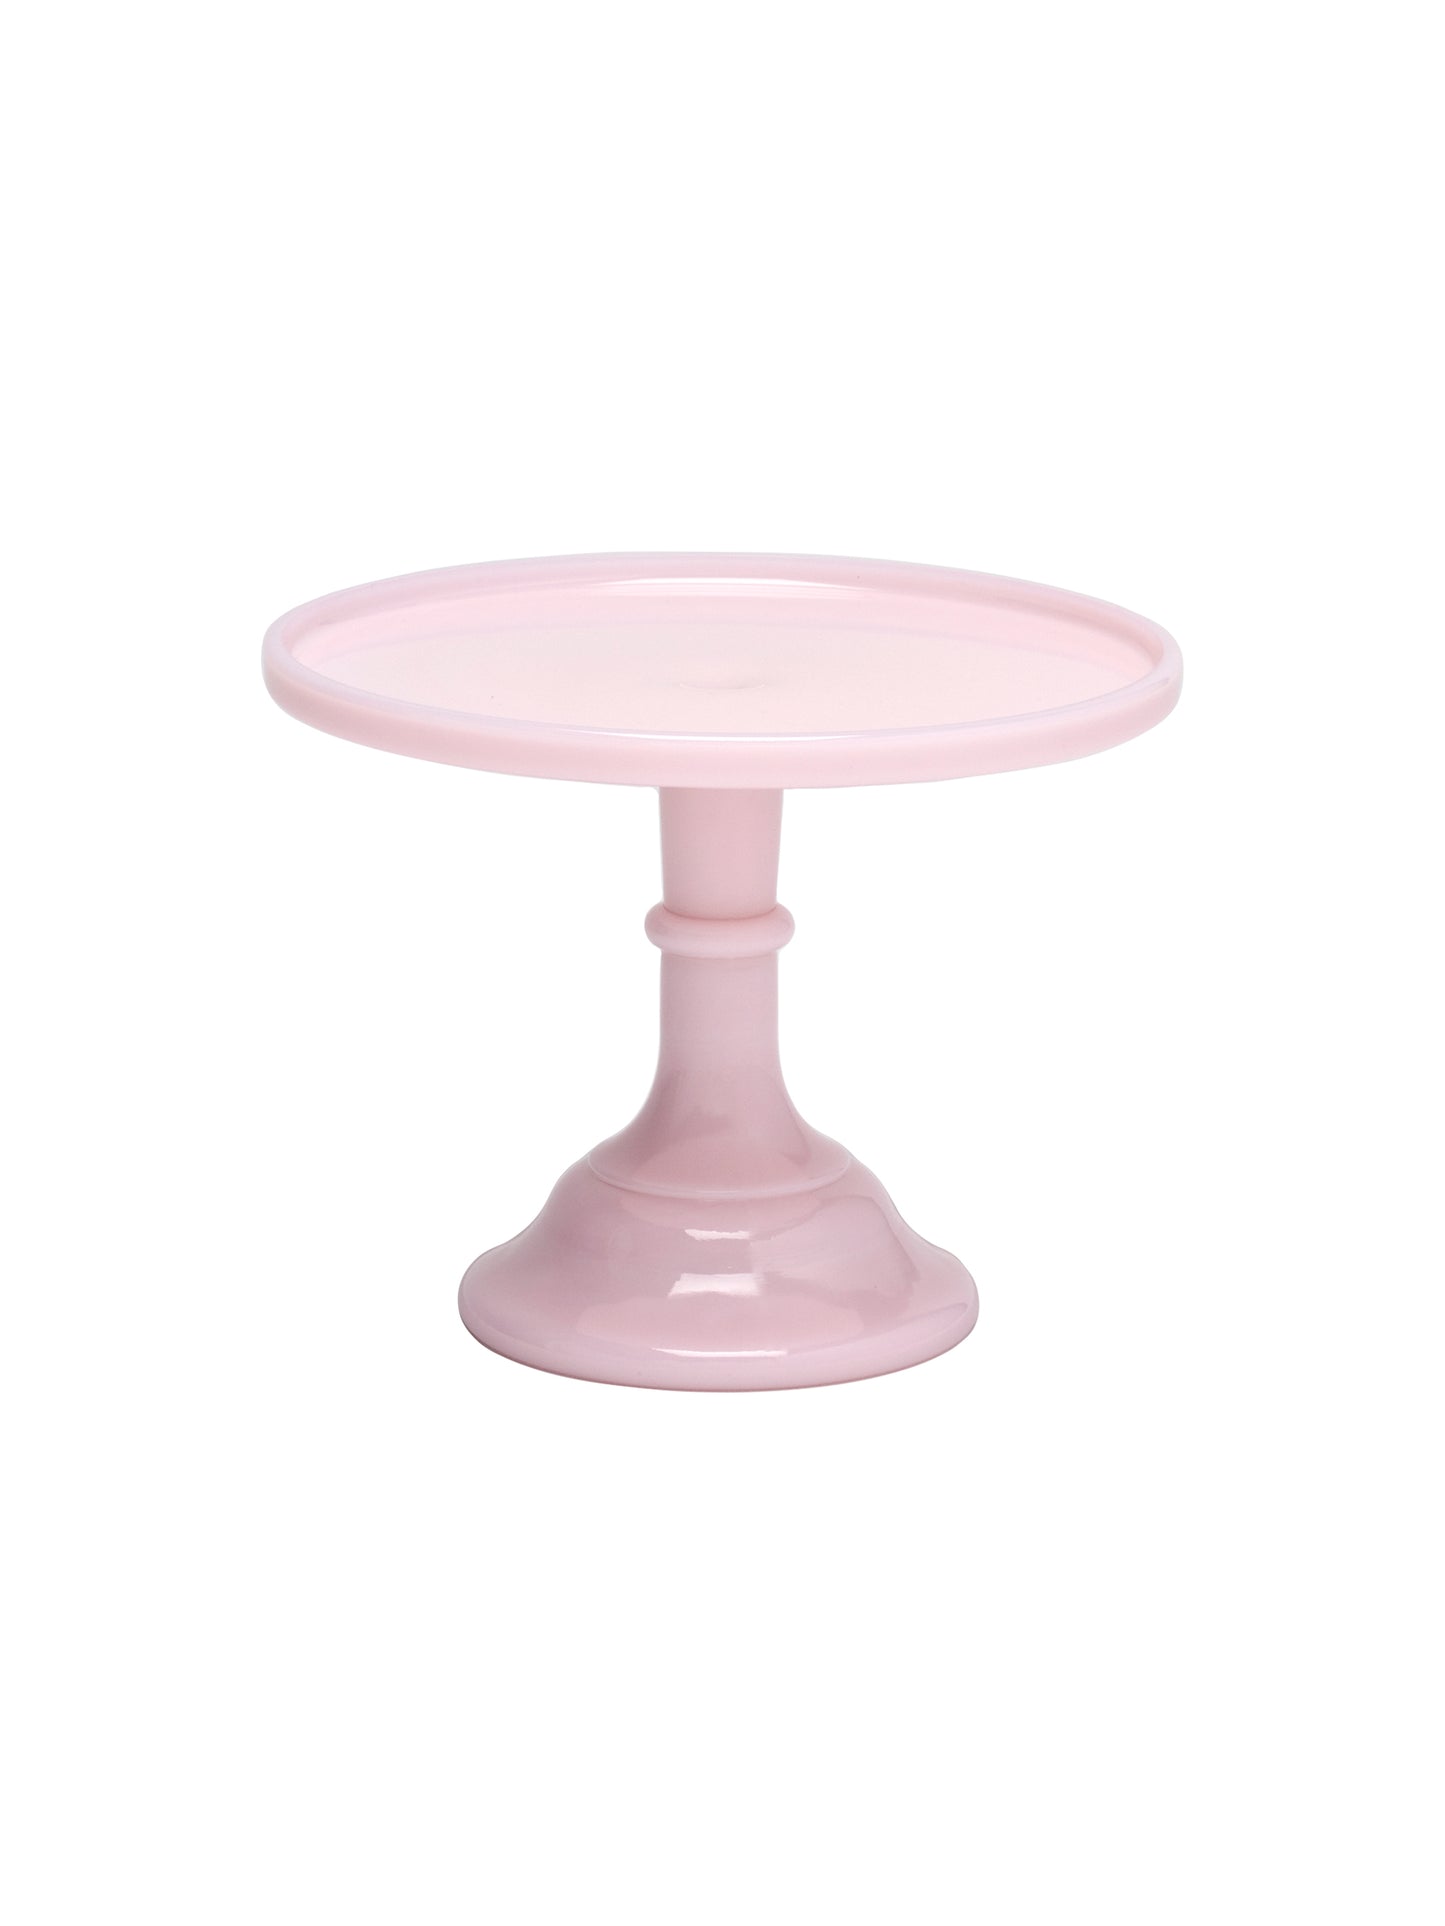 Mosser Crown Tuscan Pink Milk Glass Cake Stand 9" D Cake Stand